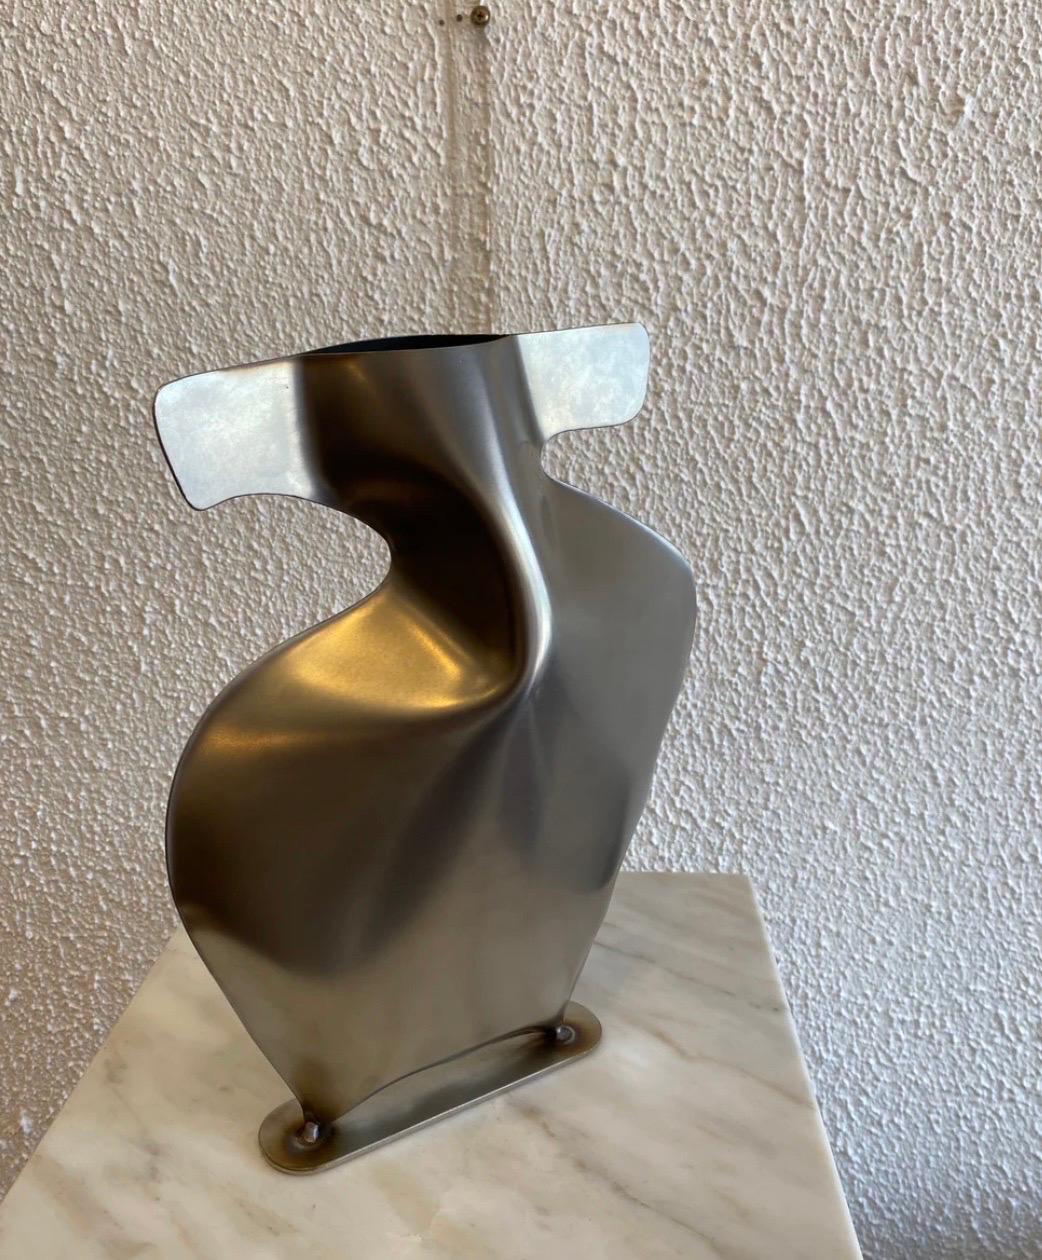 Steel Vase 1 by Duzi Objects 

Perth-based steel sculpture artist Douglas Powell of Duzi Objects delves into the realms of fluidity, movement, and three-dimensional shapes through his meticulously crafted steel sculptures. With a keen eye for detail